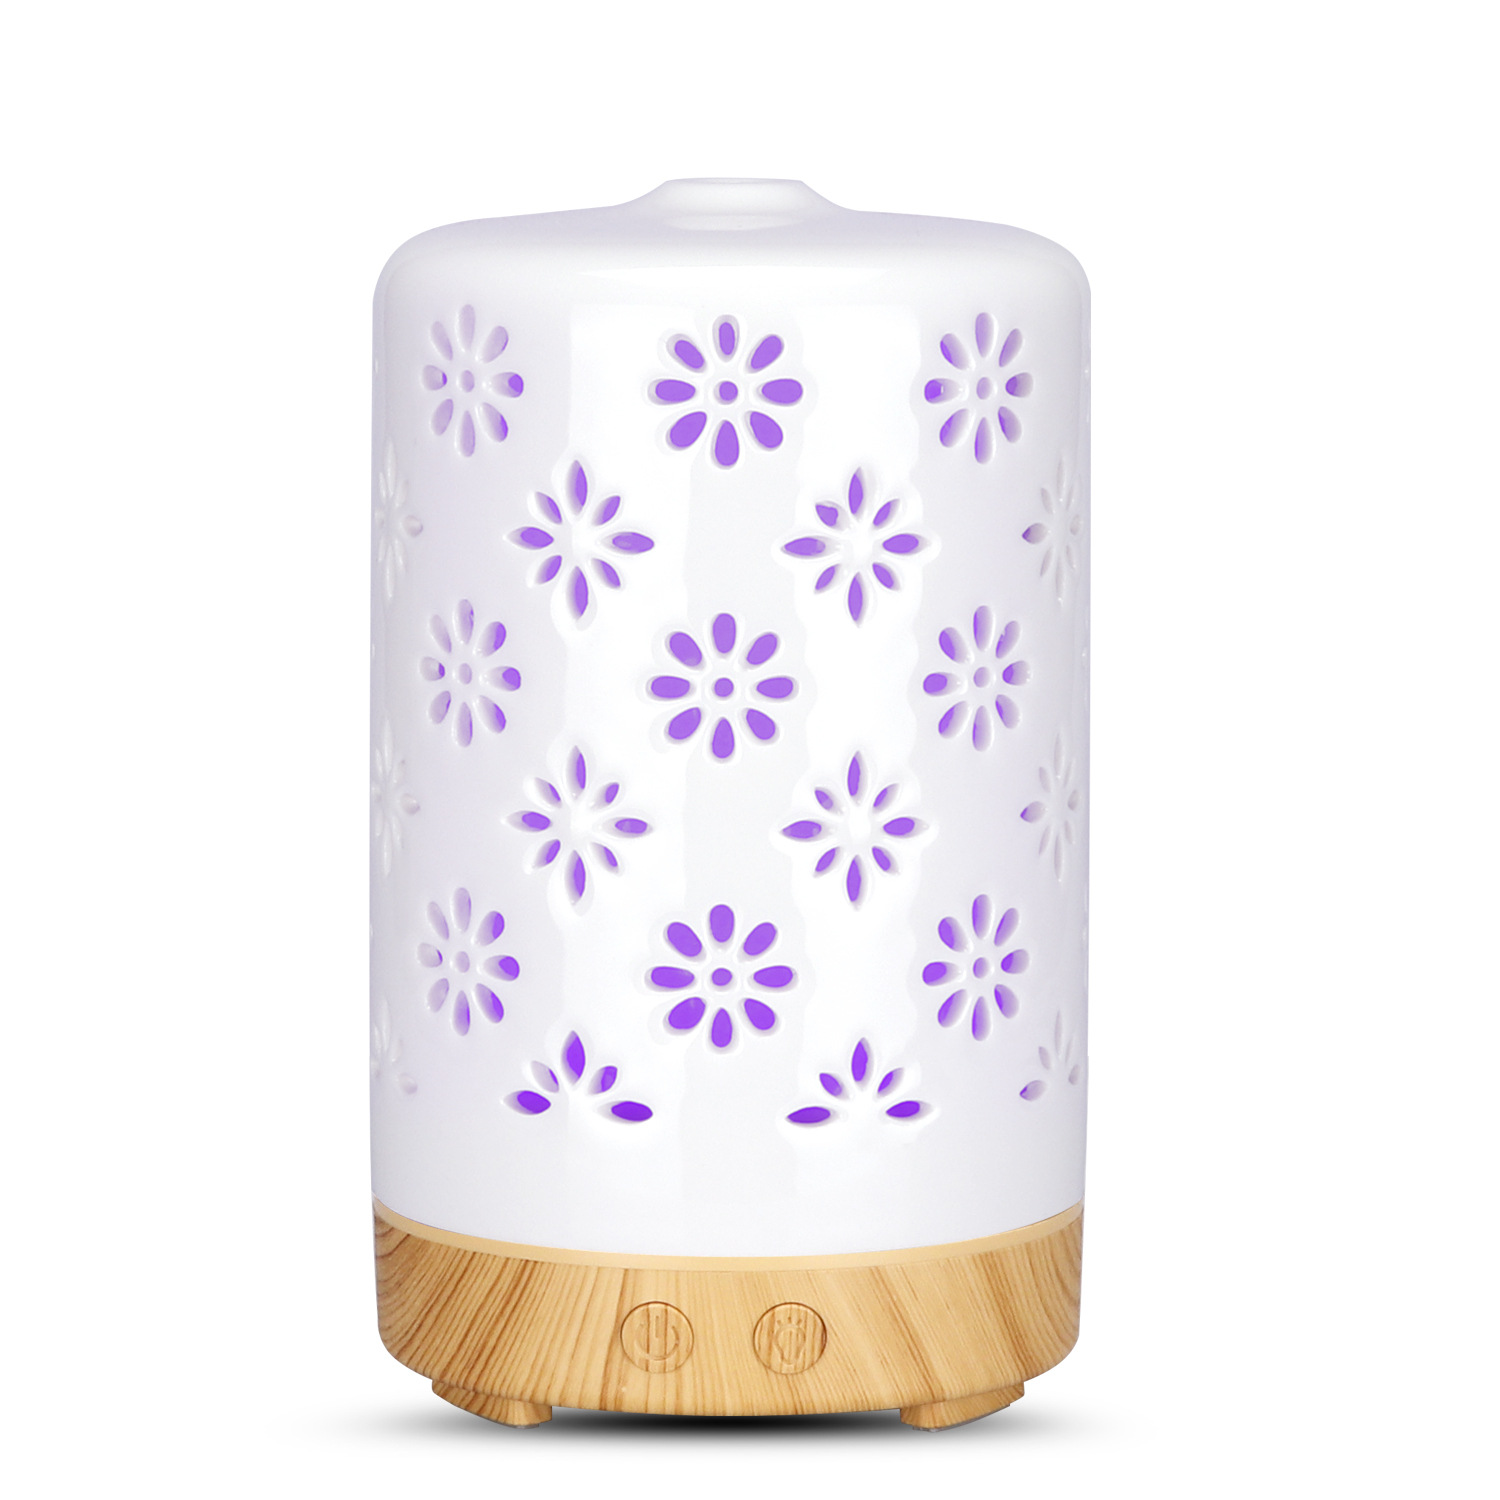 factory Outlets for Ceramic Hollow Essential Oil Aroma Air Diffuser with Whisper Quiet